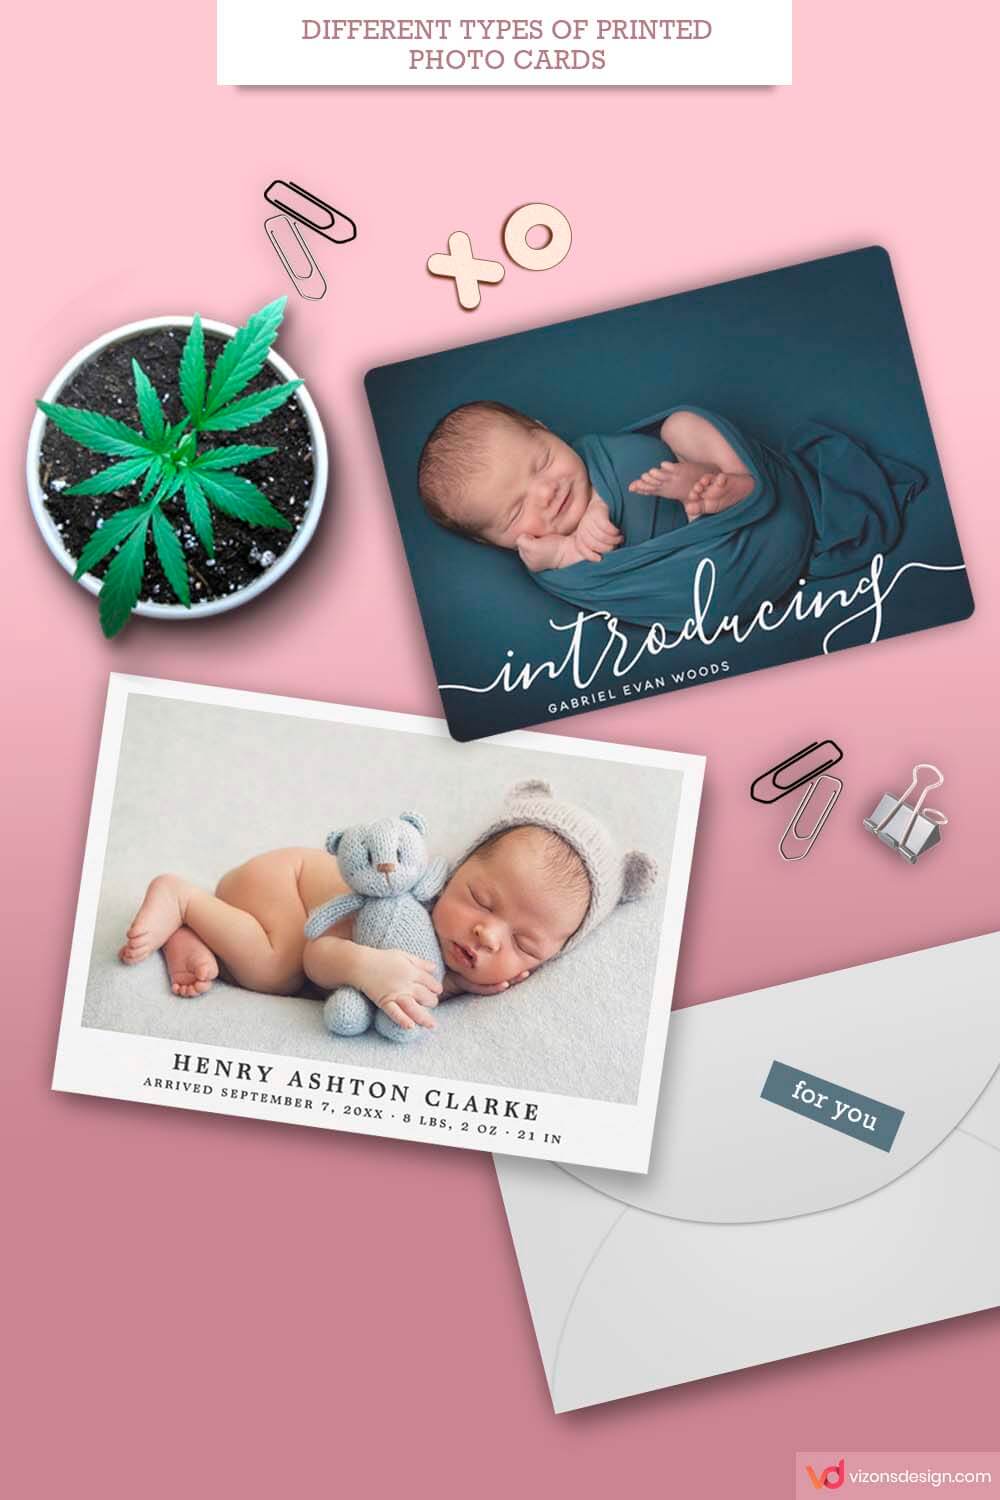 Different Types Of Photo Printed Cards